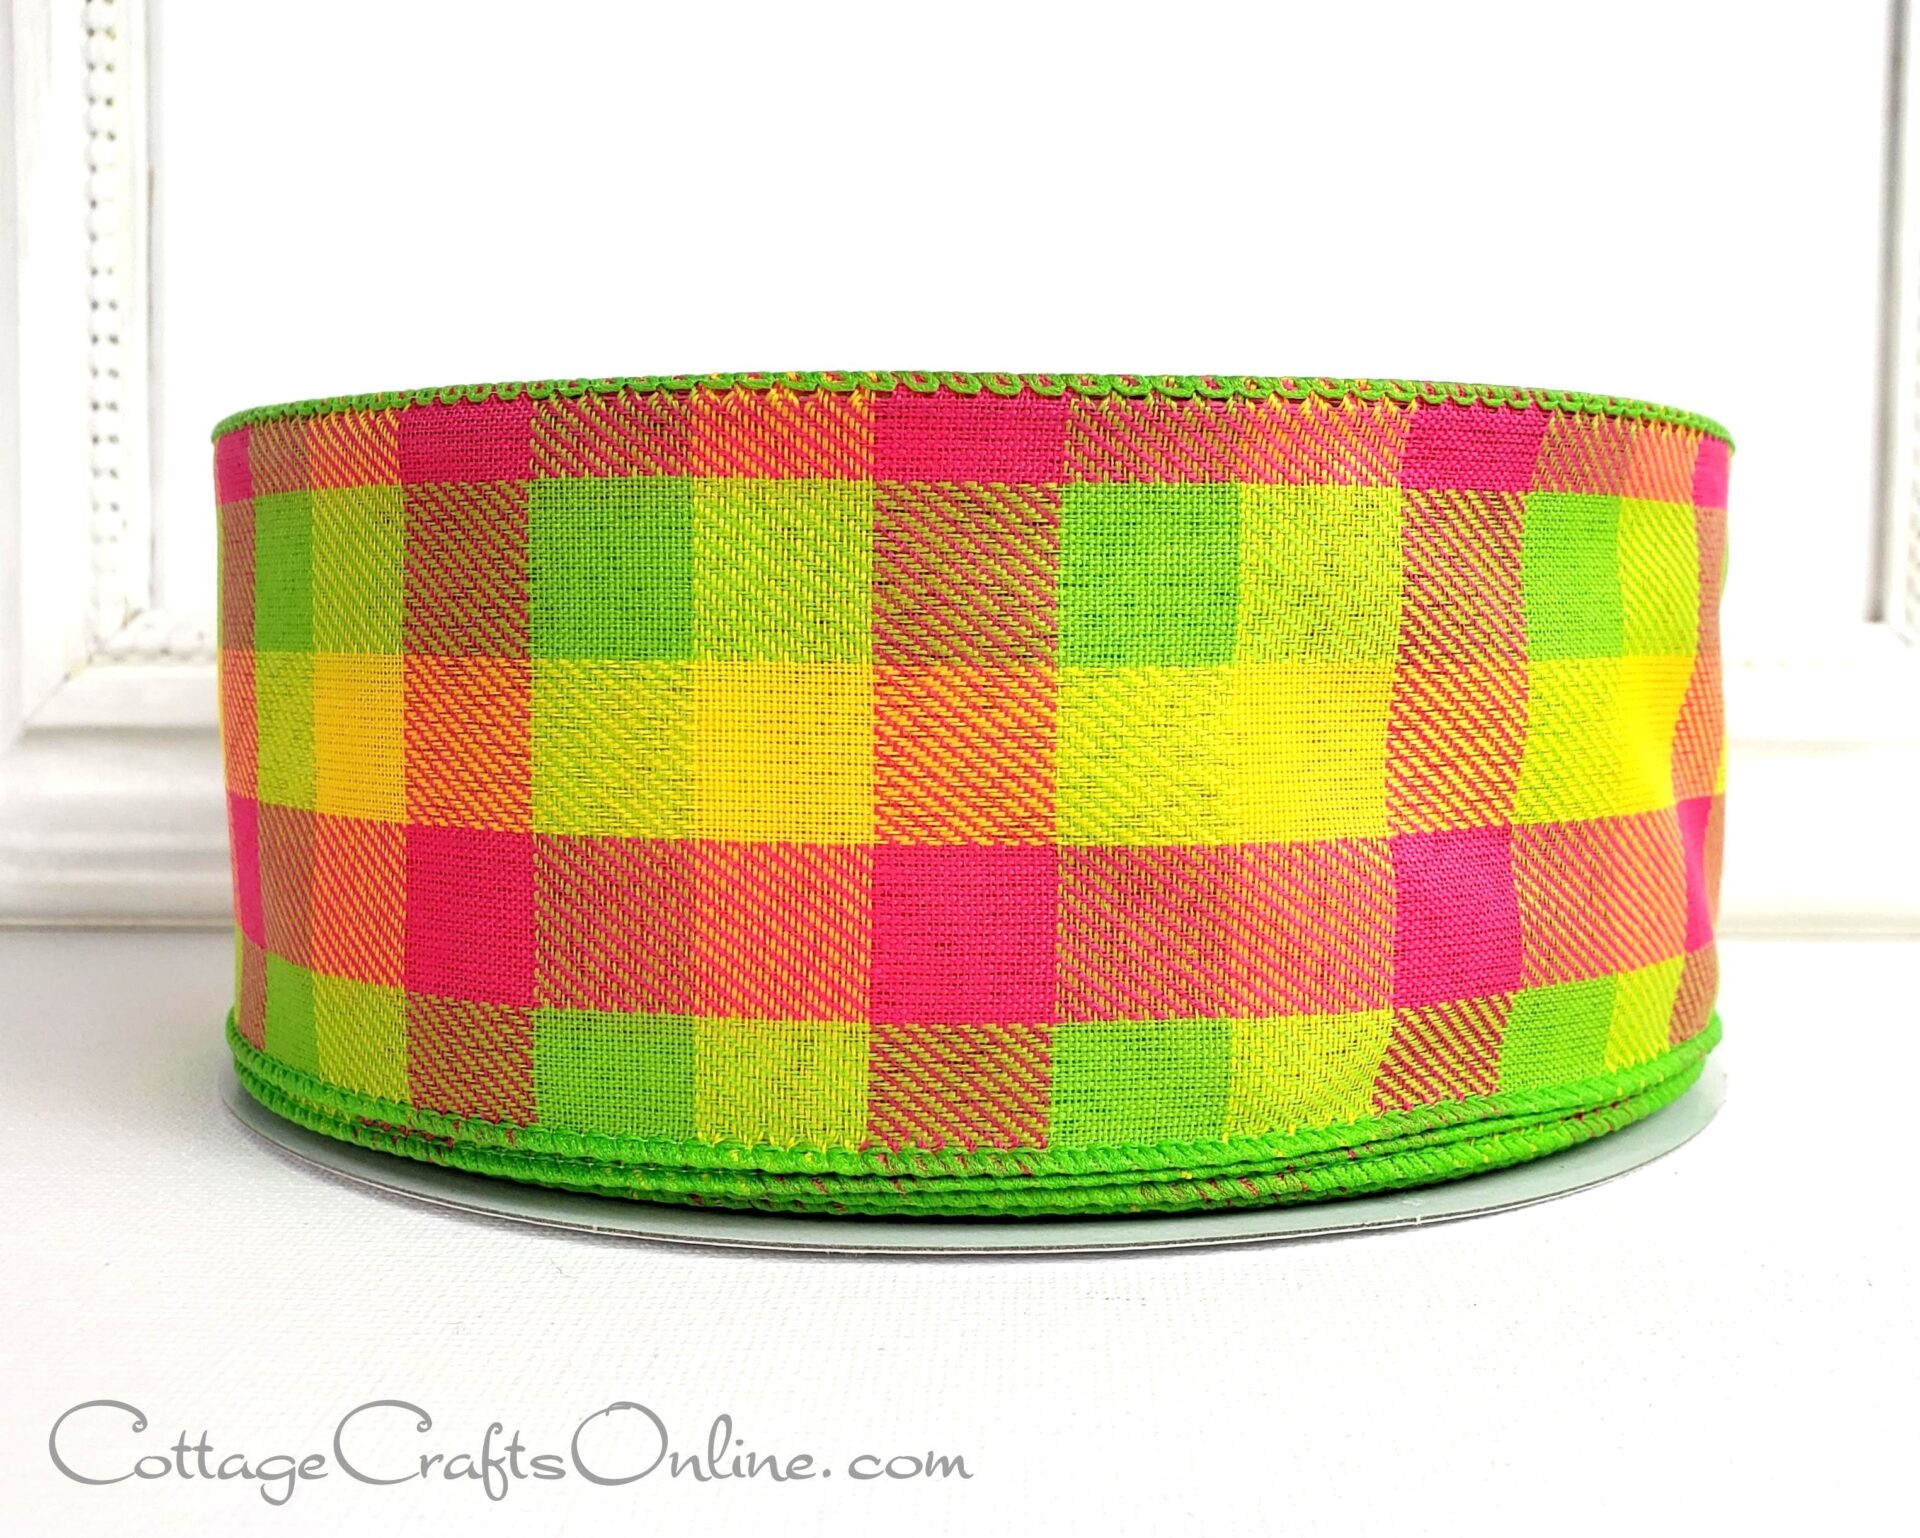 A close up of the ribbon on a green and yellow plaid ribbon